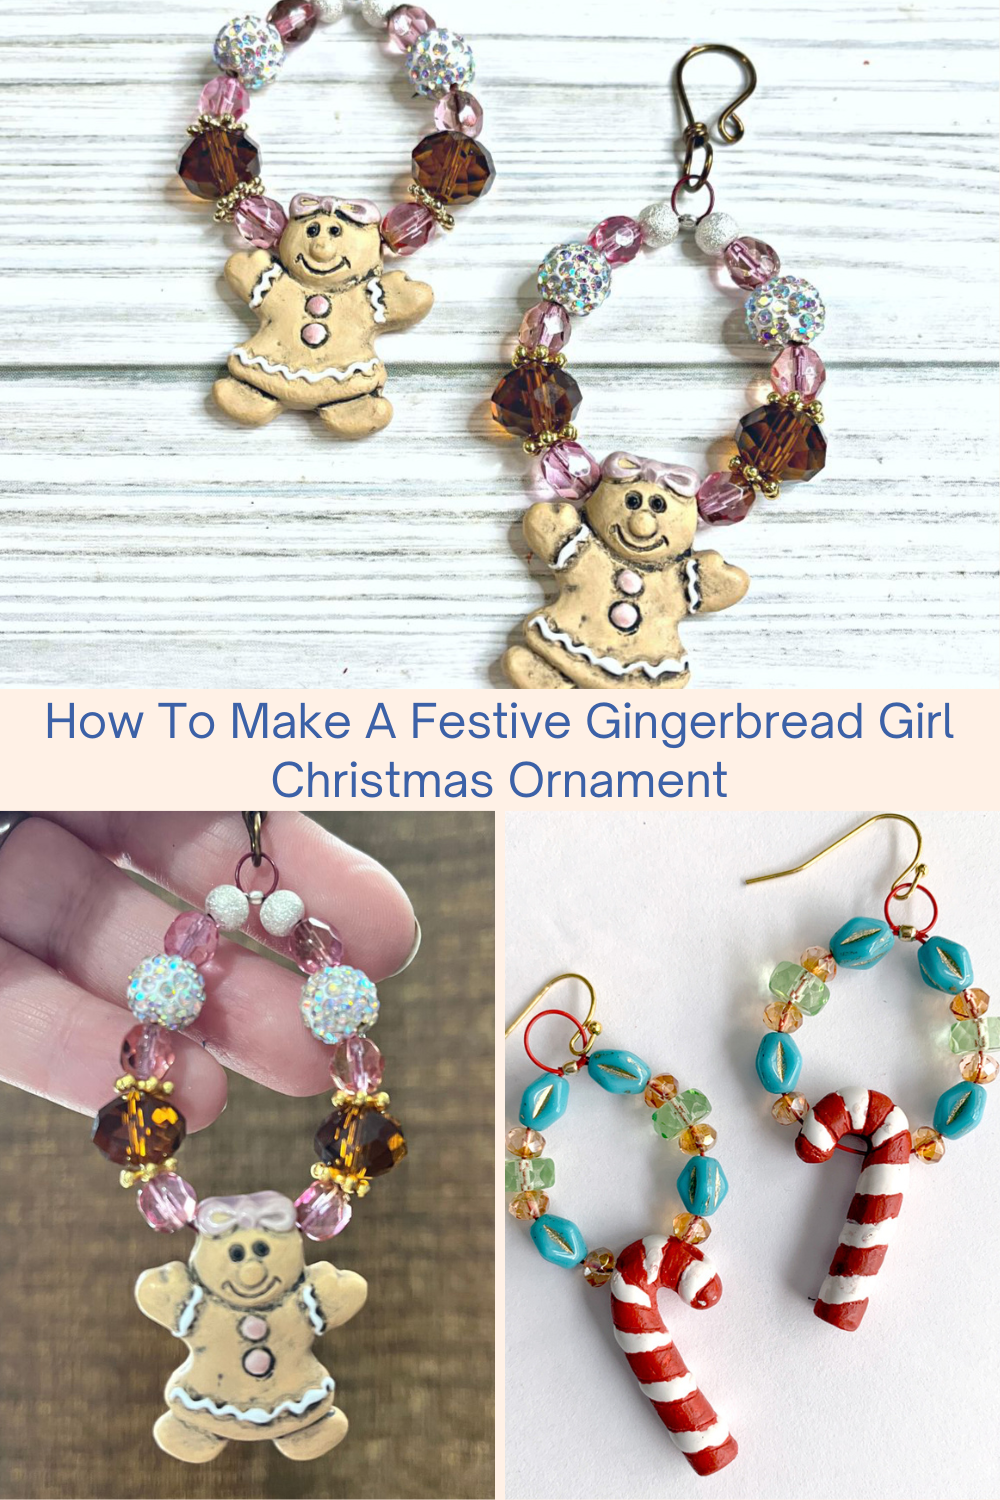 How To Make A Festive Gingerbread Girl Christmas Ornament Collage